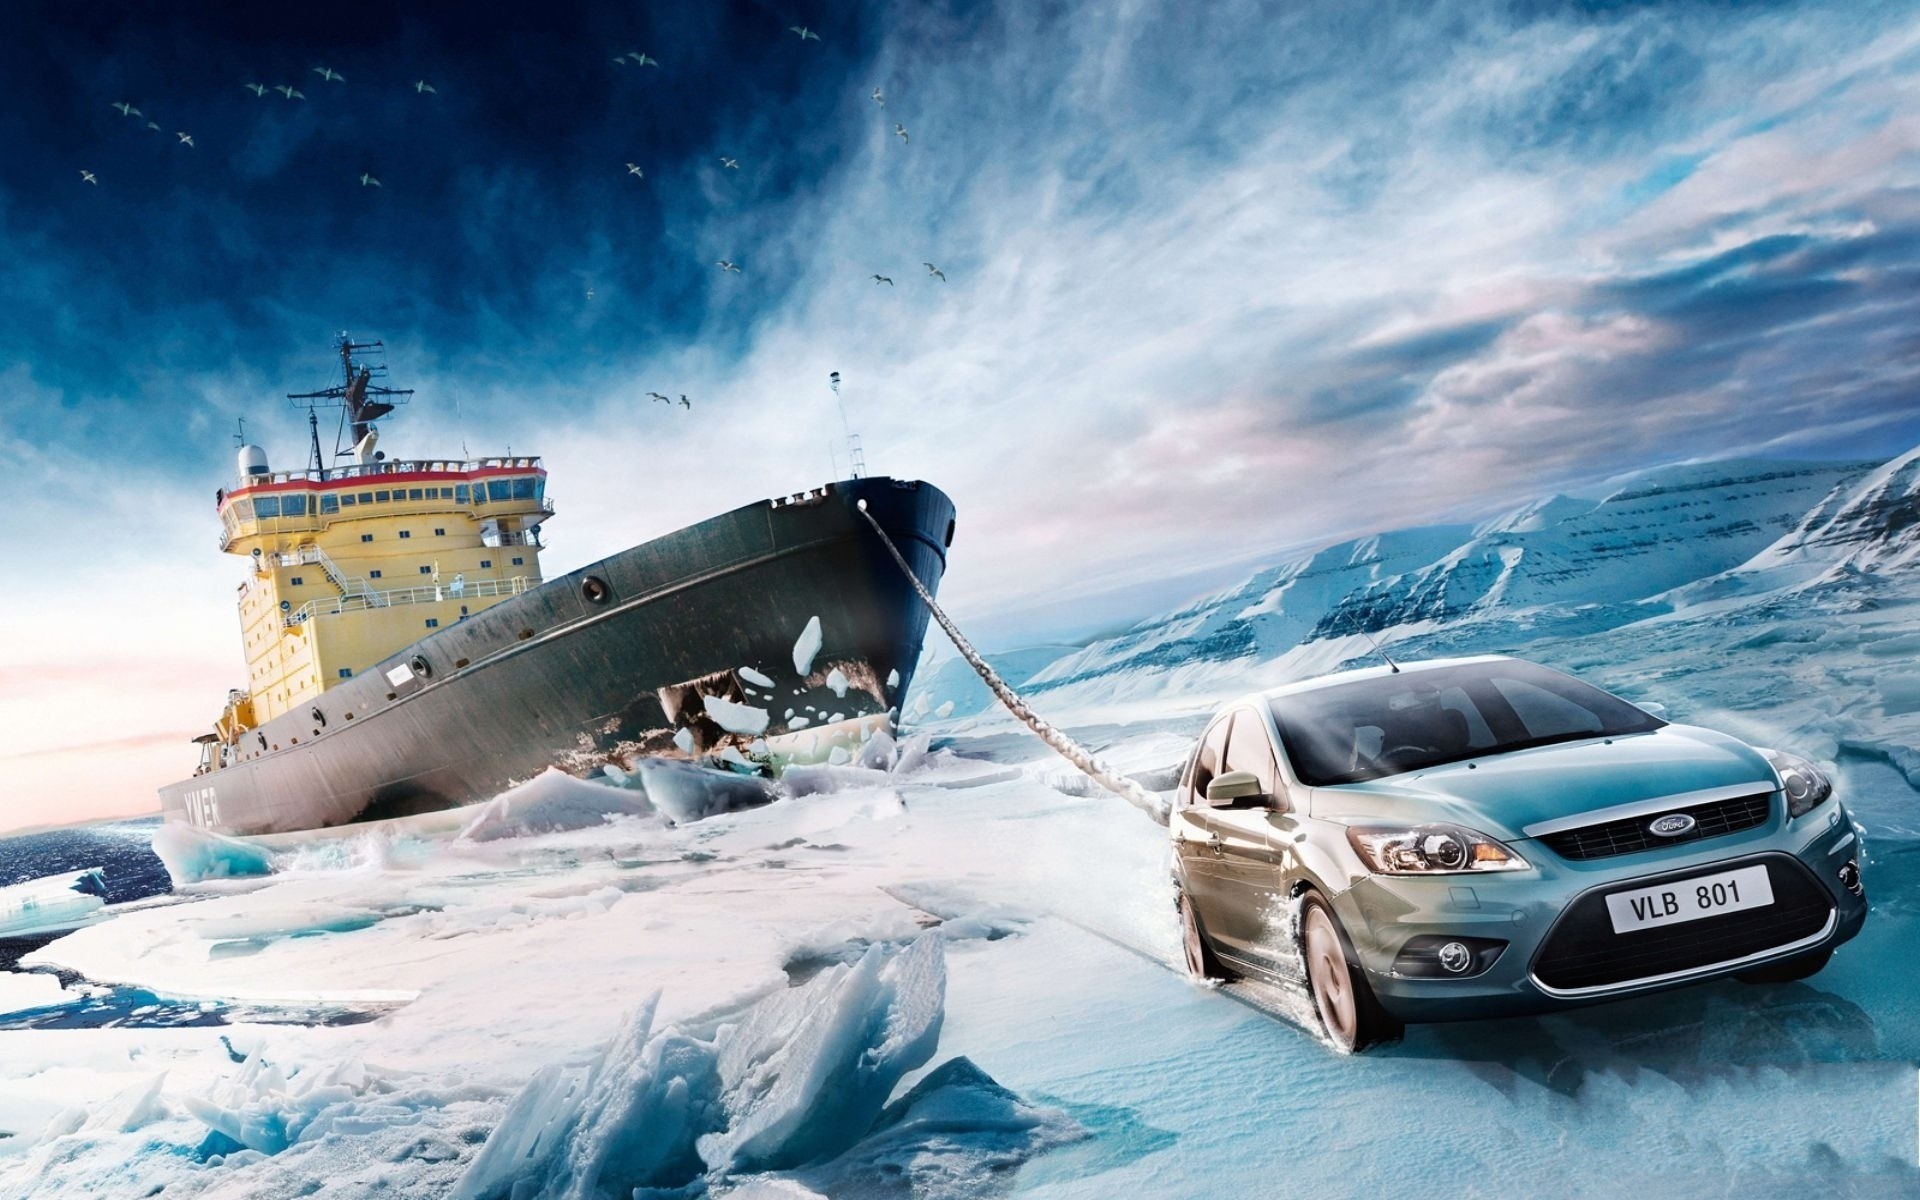 Vehicle Car Ford Ford Focus Ship Iceberg Ropes Sea Winter Snow Photo Manipulation Commercial Icebrea 1920x1200